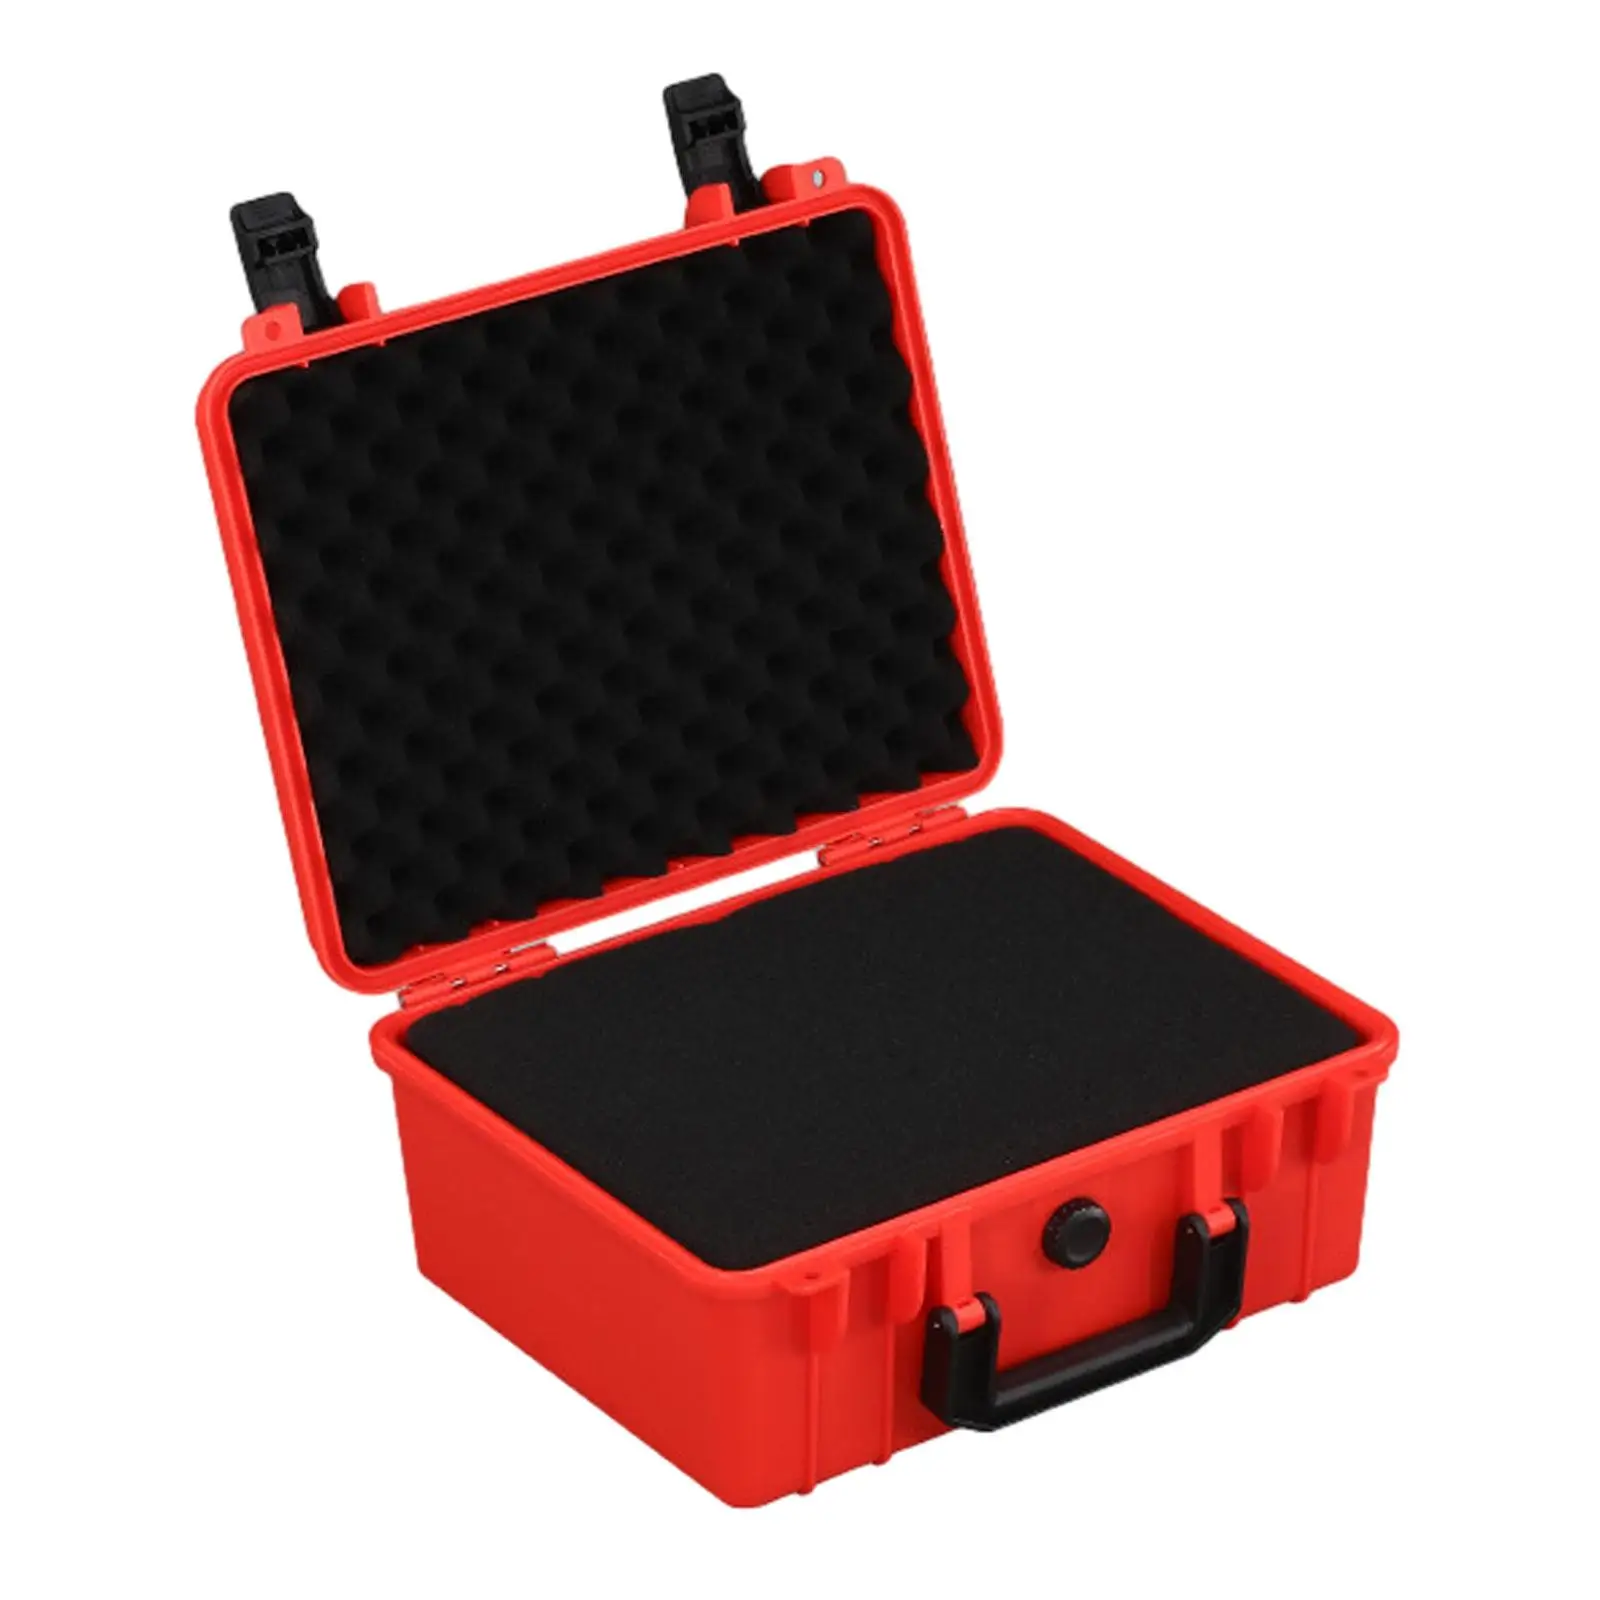 Toolbox Storage Case with Foam Insert Hard Case for Household Hobby or Craft